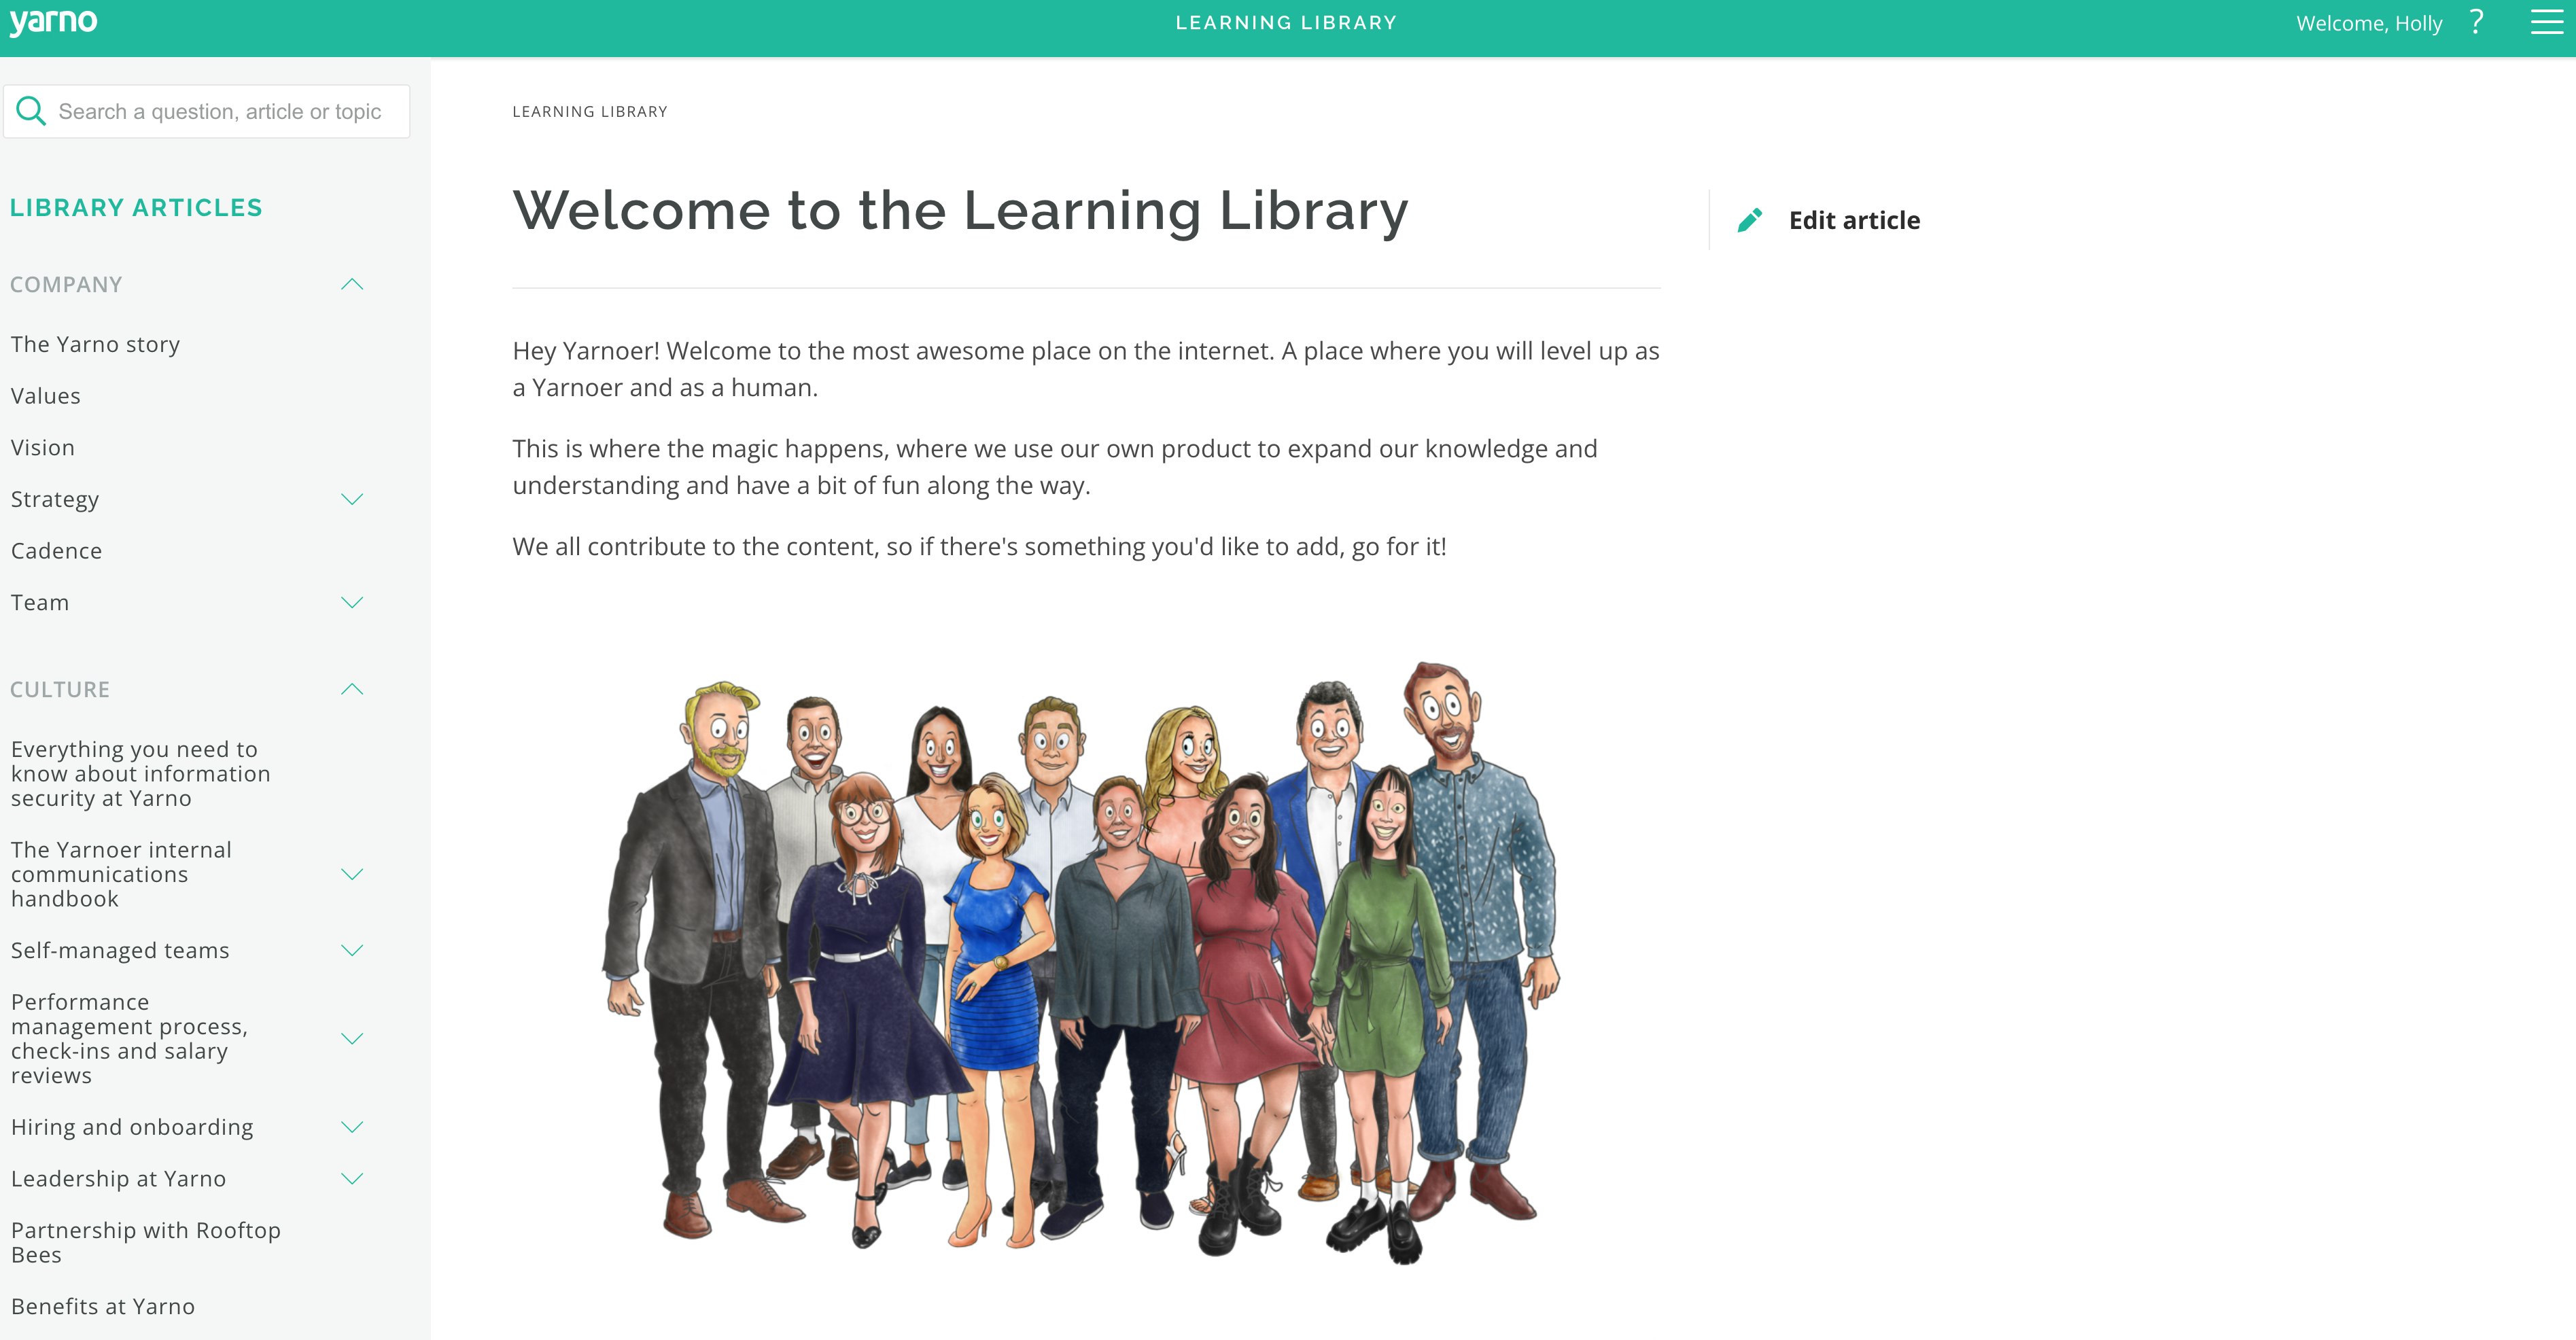 Welcome to the Learning Library